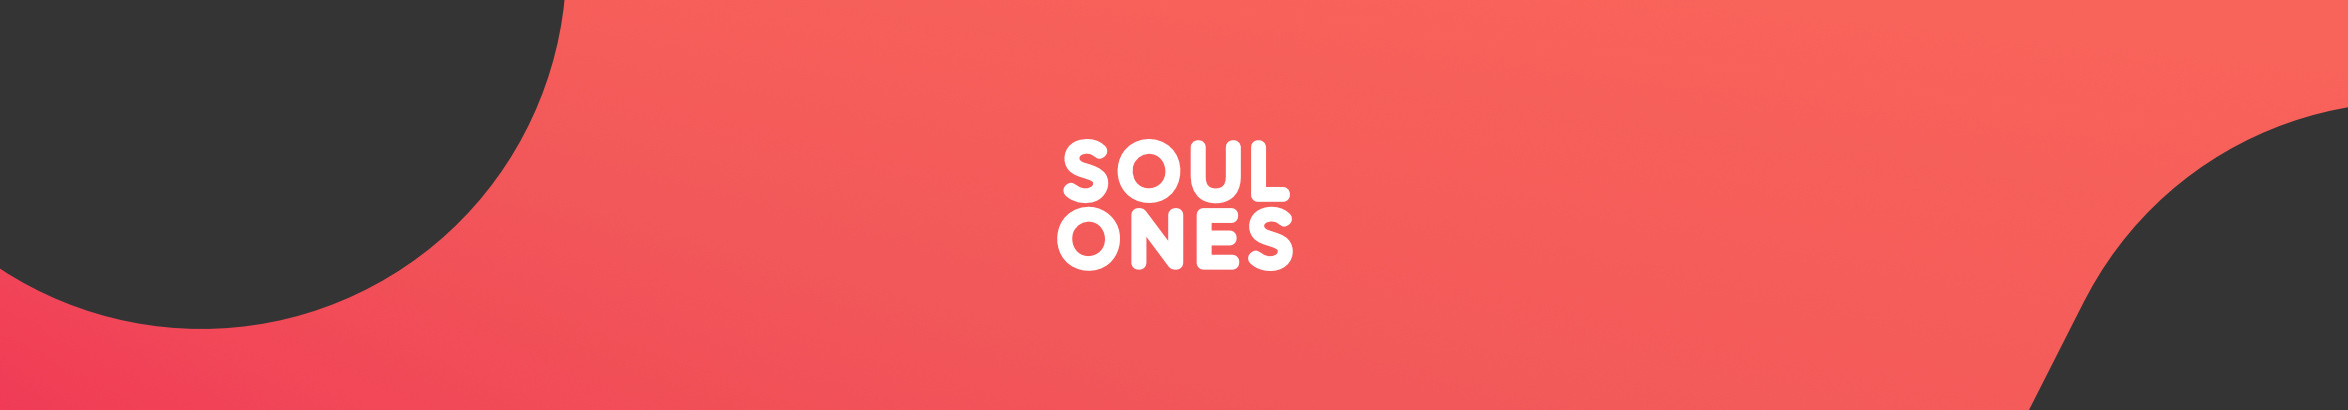 SoulOnes Oy's profile banner